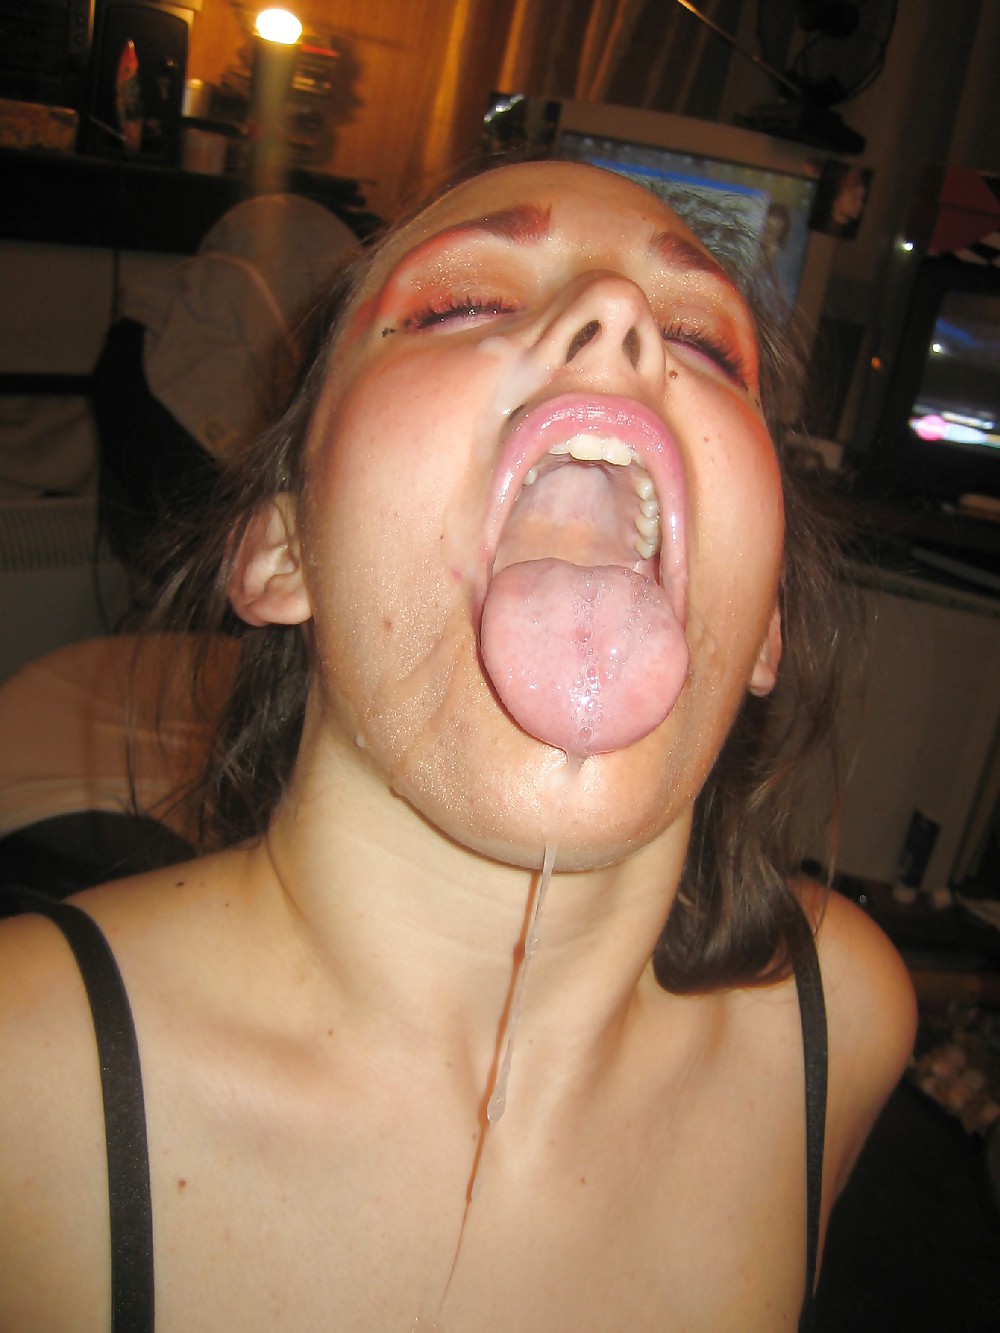 Cumshots in her open mouth - N. C.  #11828468